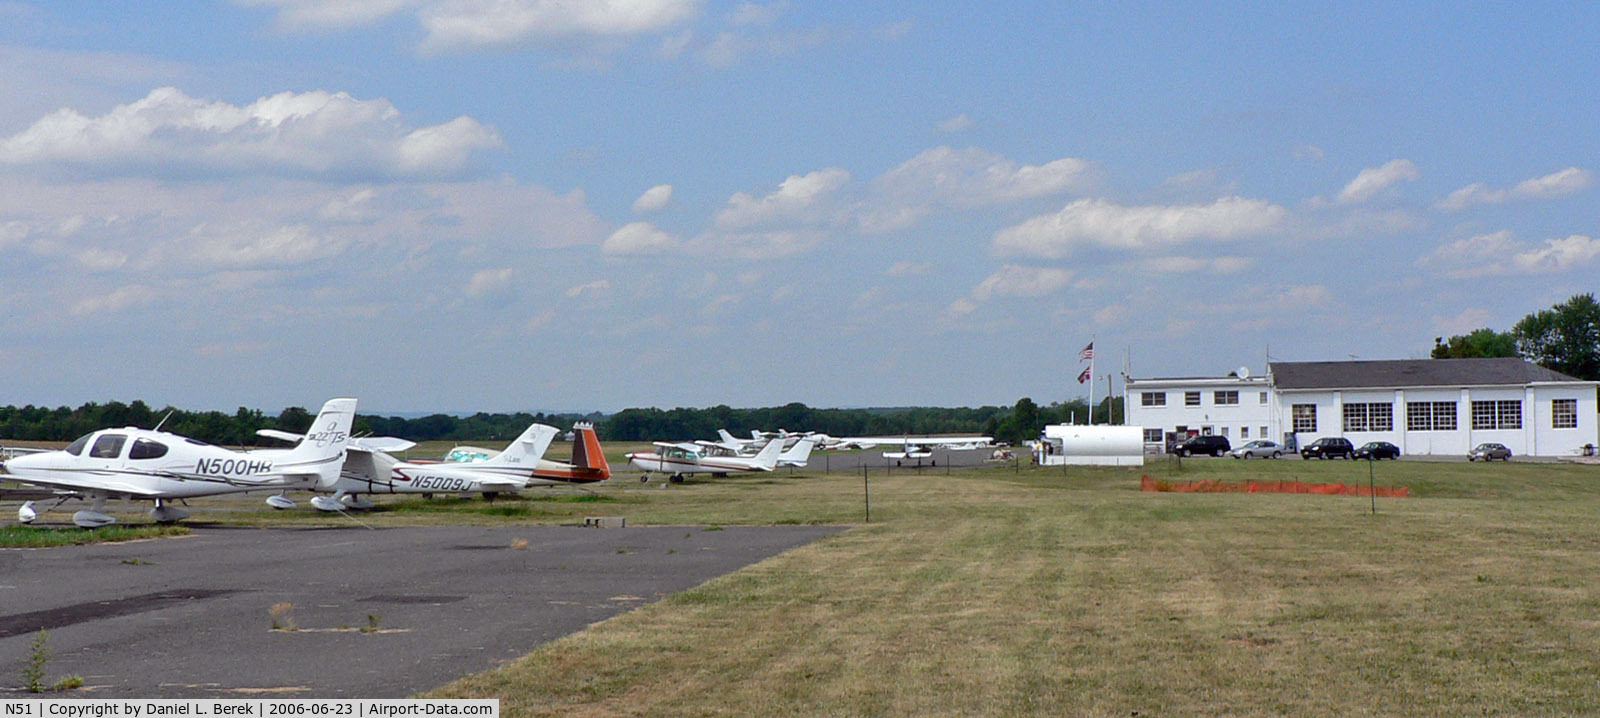 Solberg-hunterdon Airport (N51) - Solberg Airport, in central New Jersey, is host to many interesting aircraft and events.